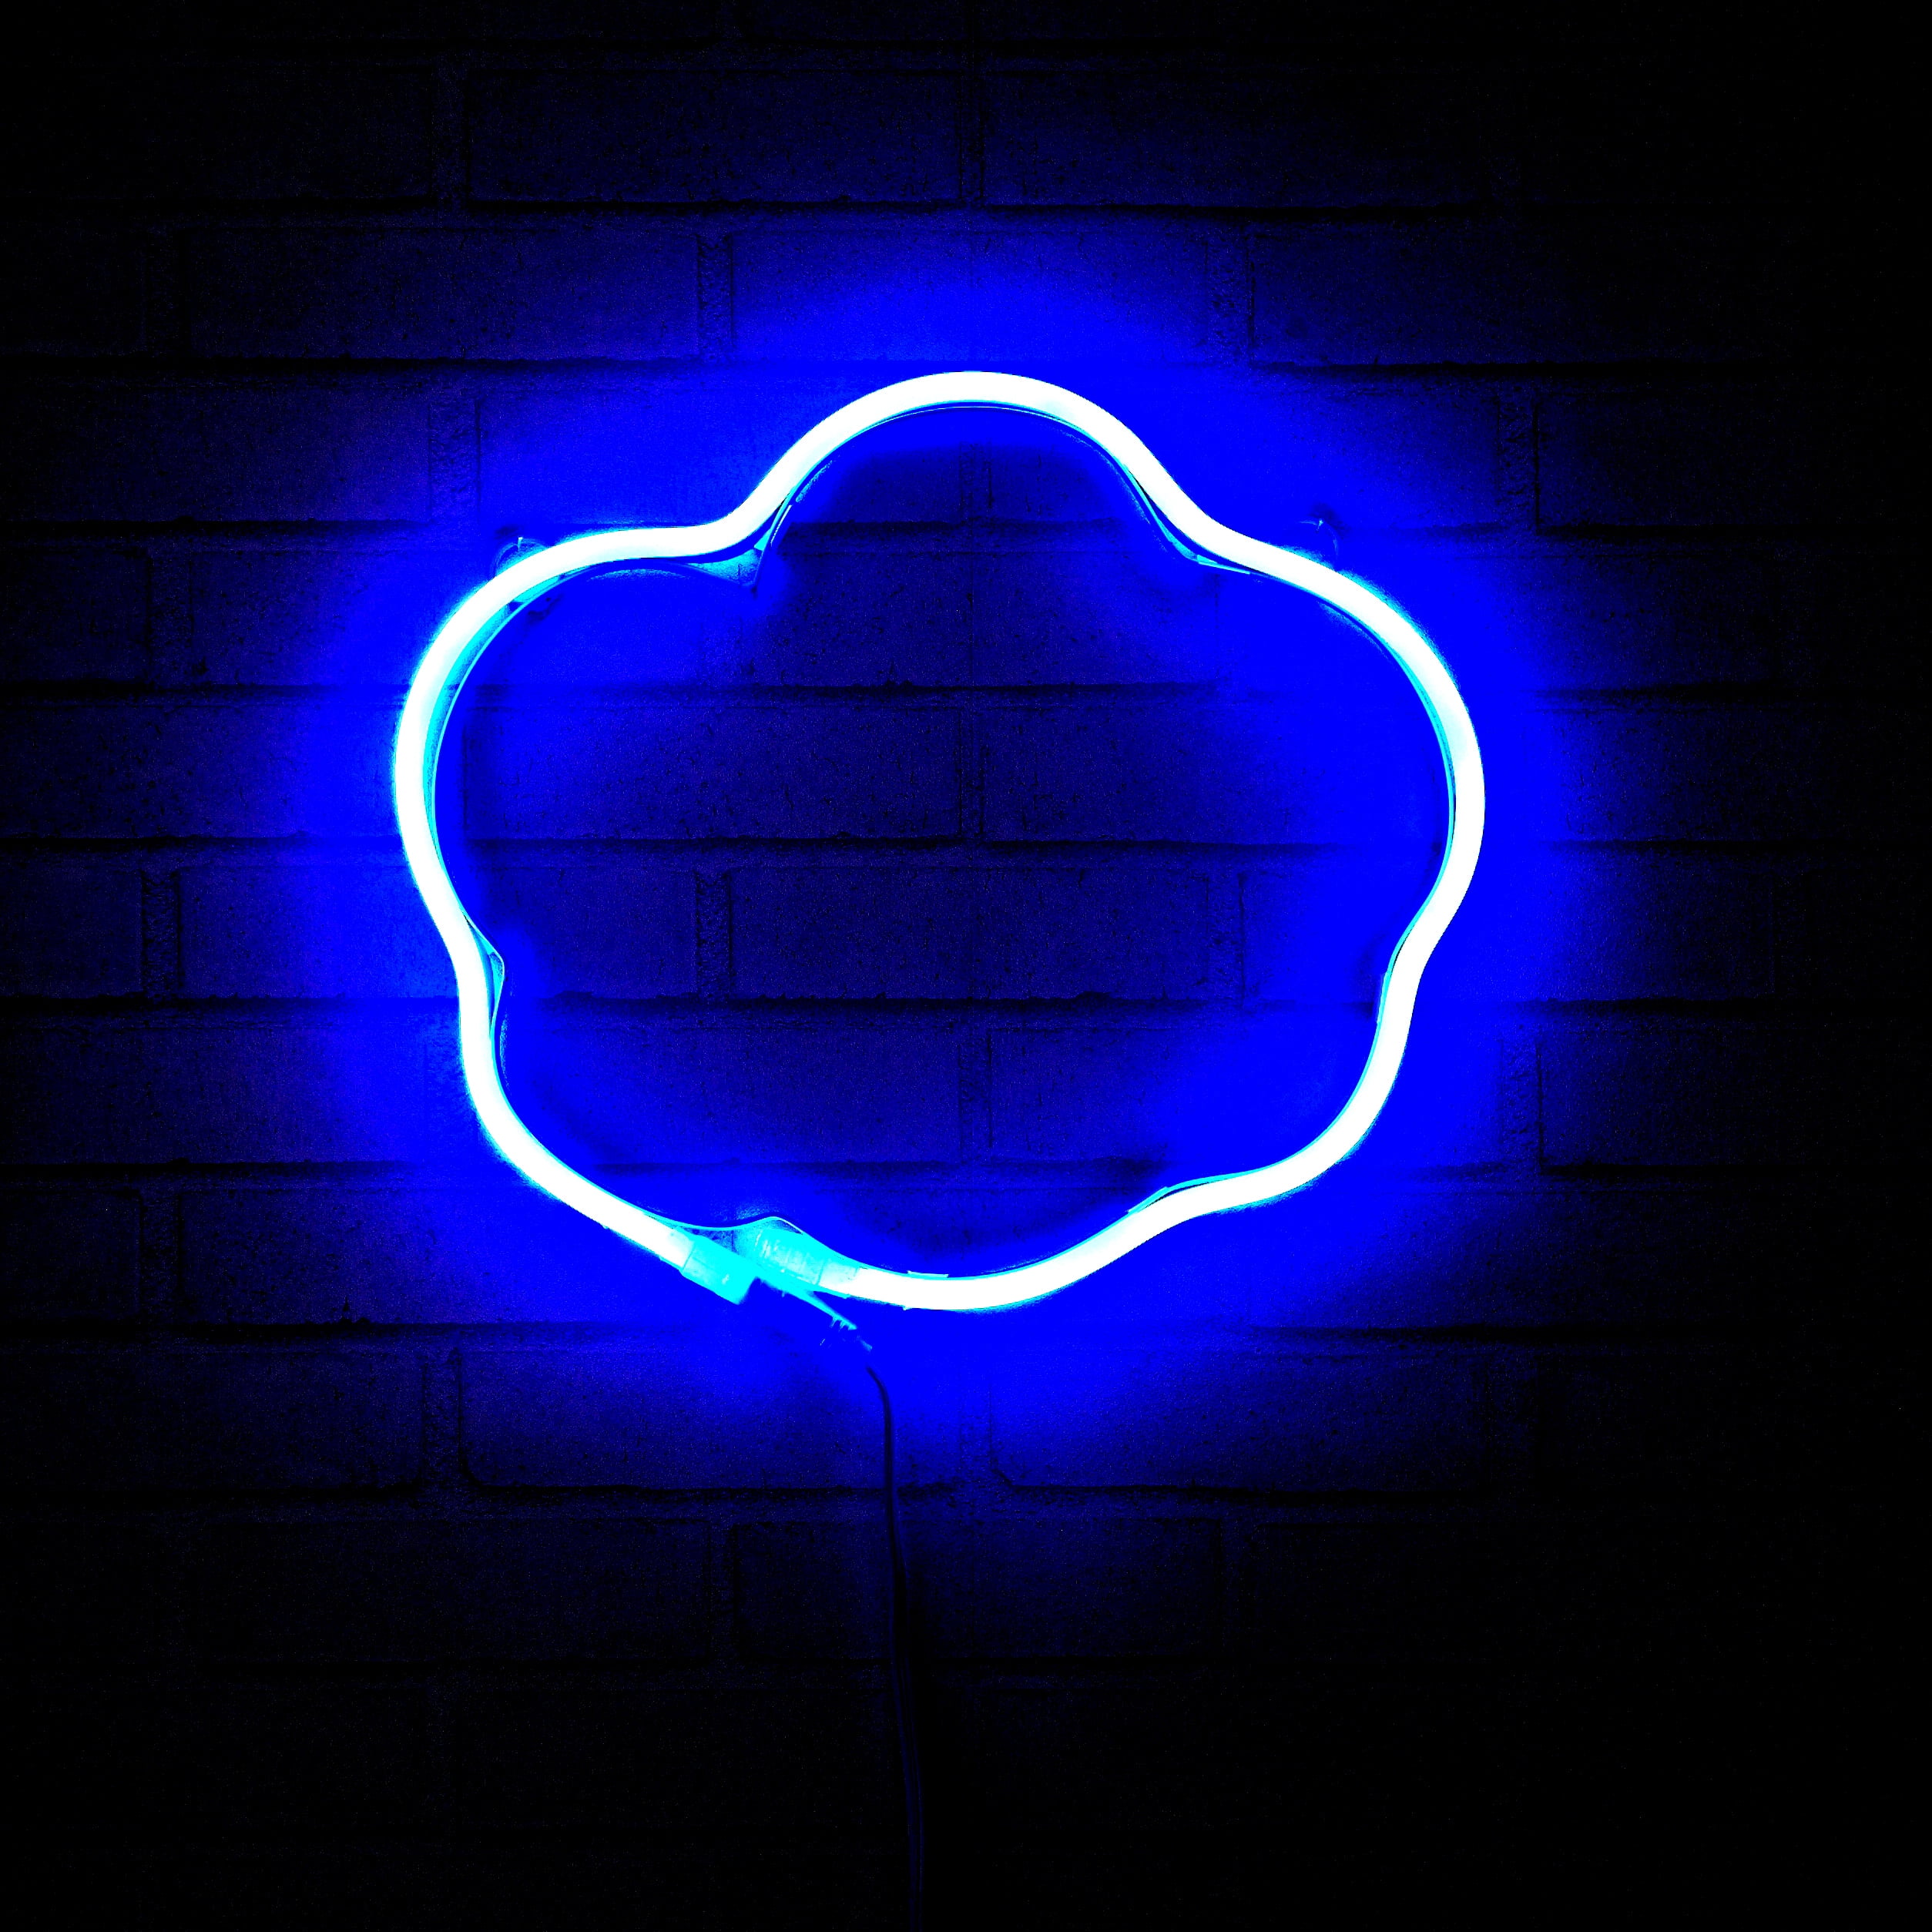 Salme Sidelæns Alice Urban Shop Fun Cloud Neon Light Wall Decor Sign, Available in Multiple  Shapes & Colors - Walmart.com